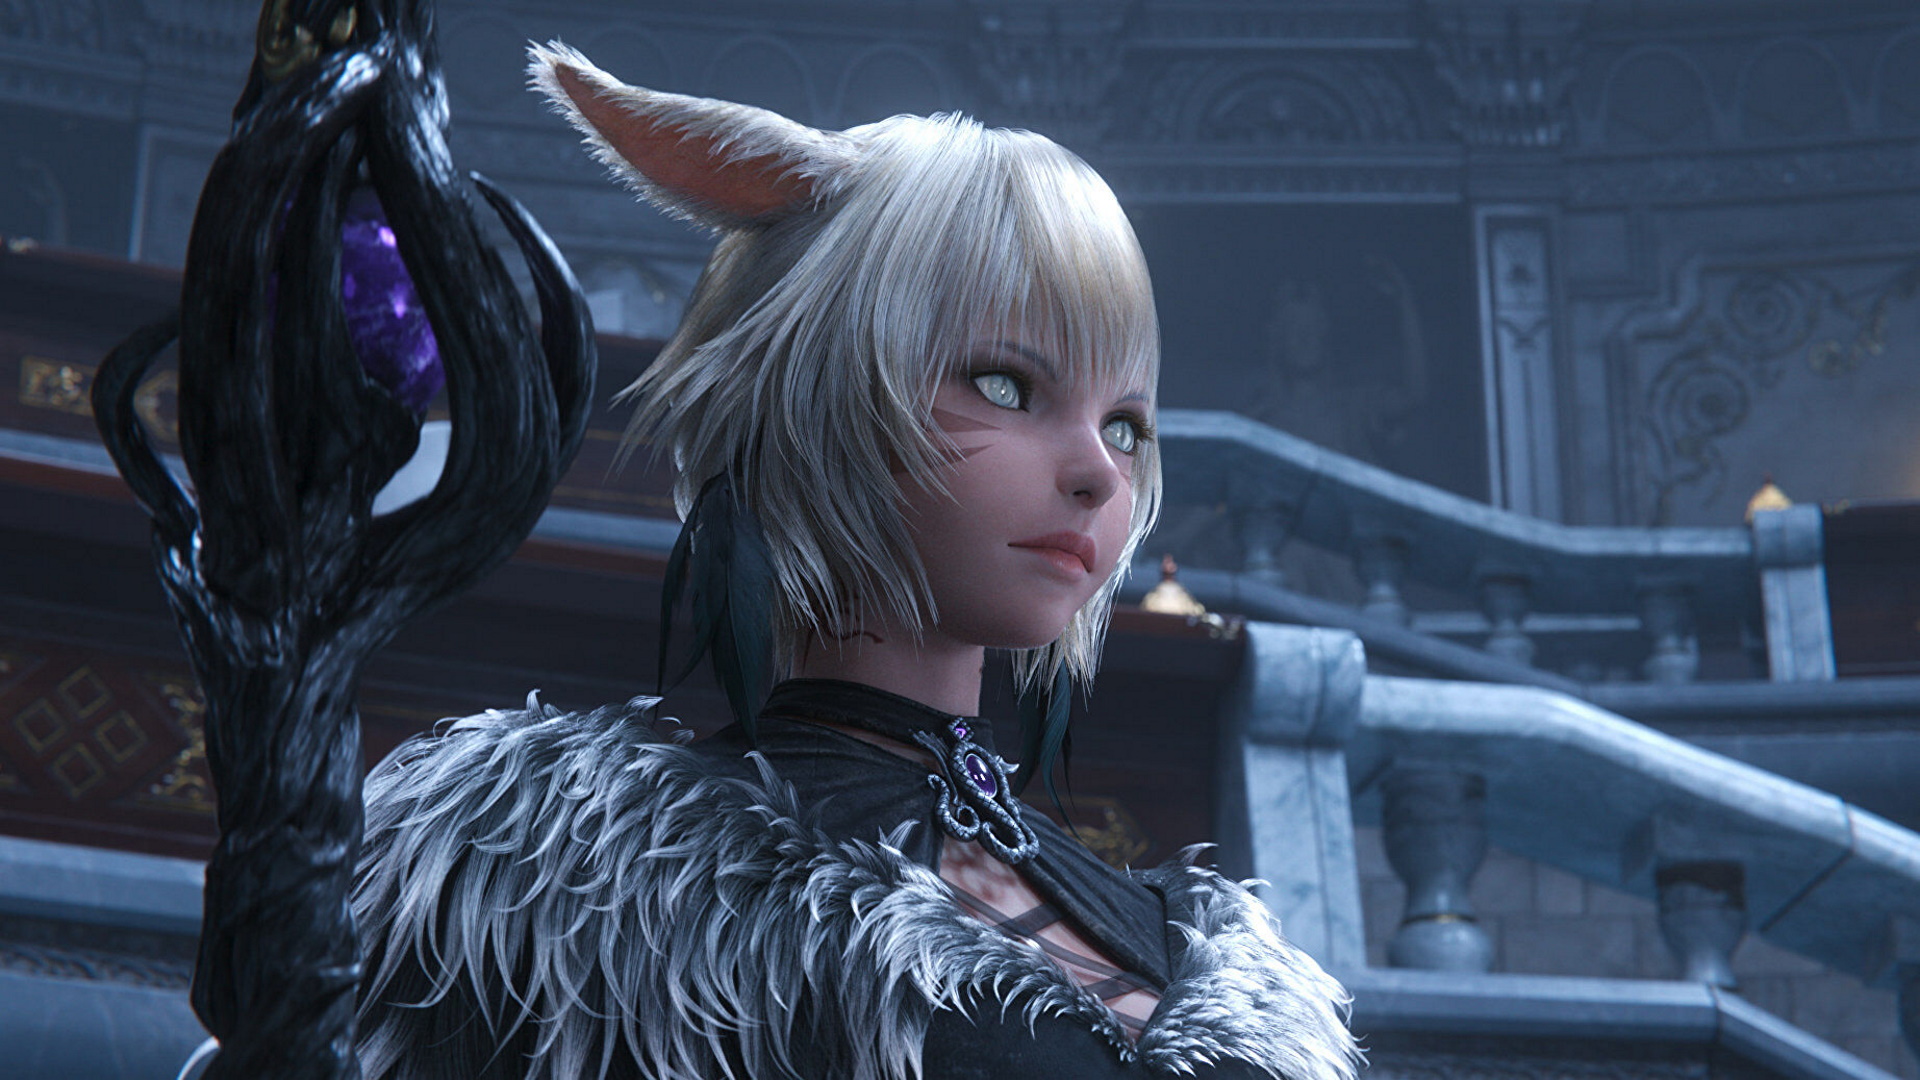 The new Final Fantasy XIV free login event wants you back in Eorzea